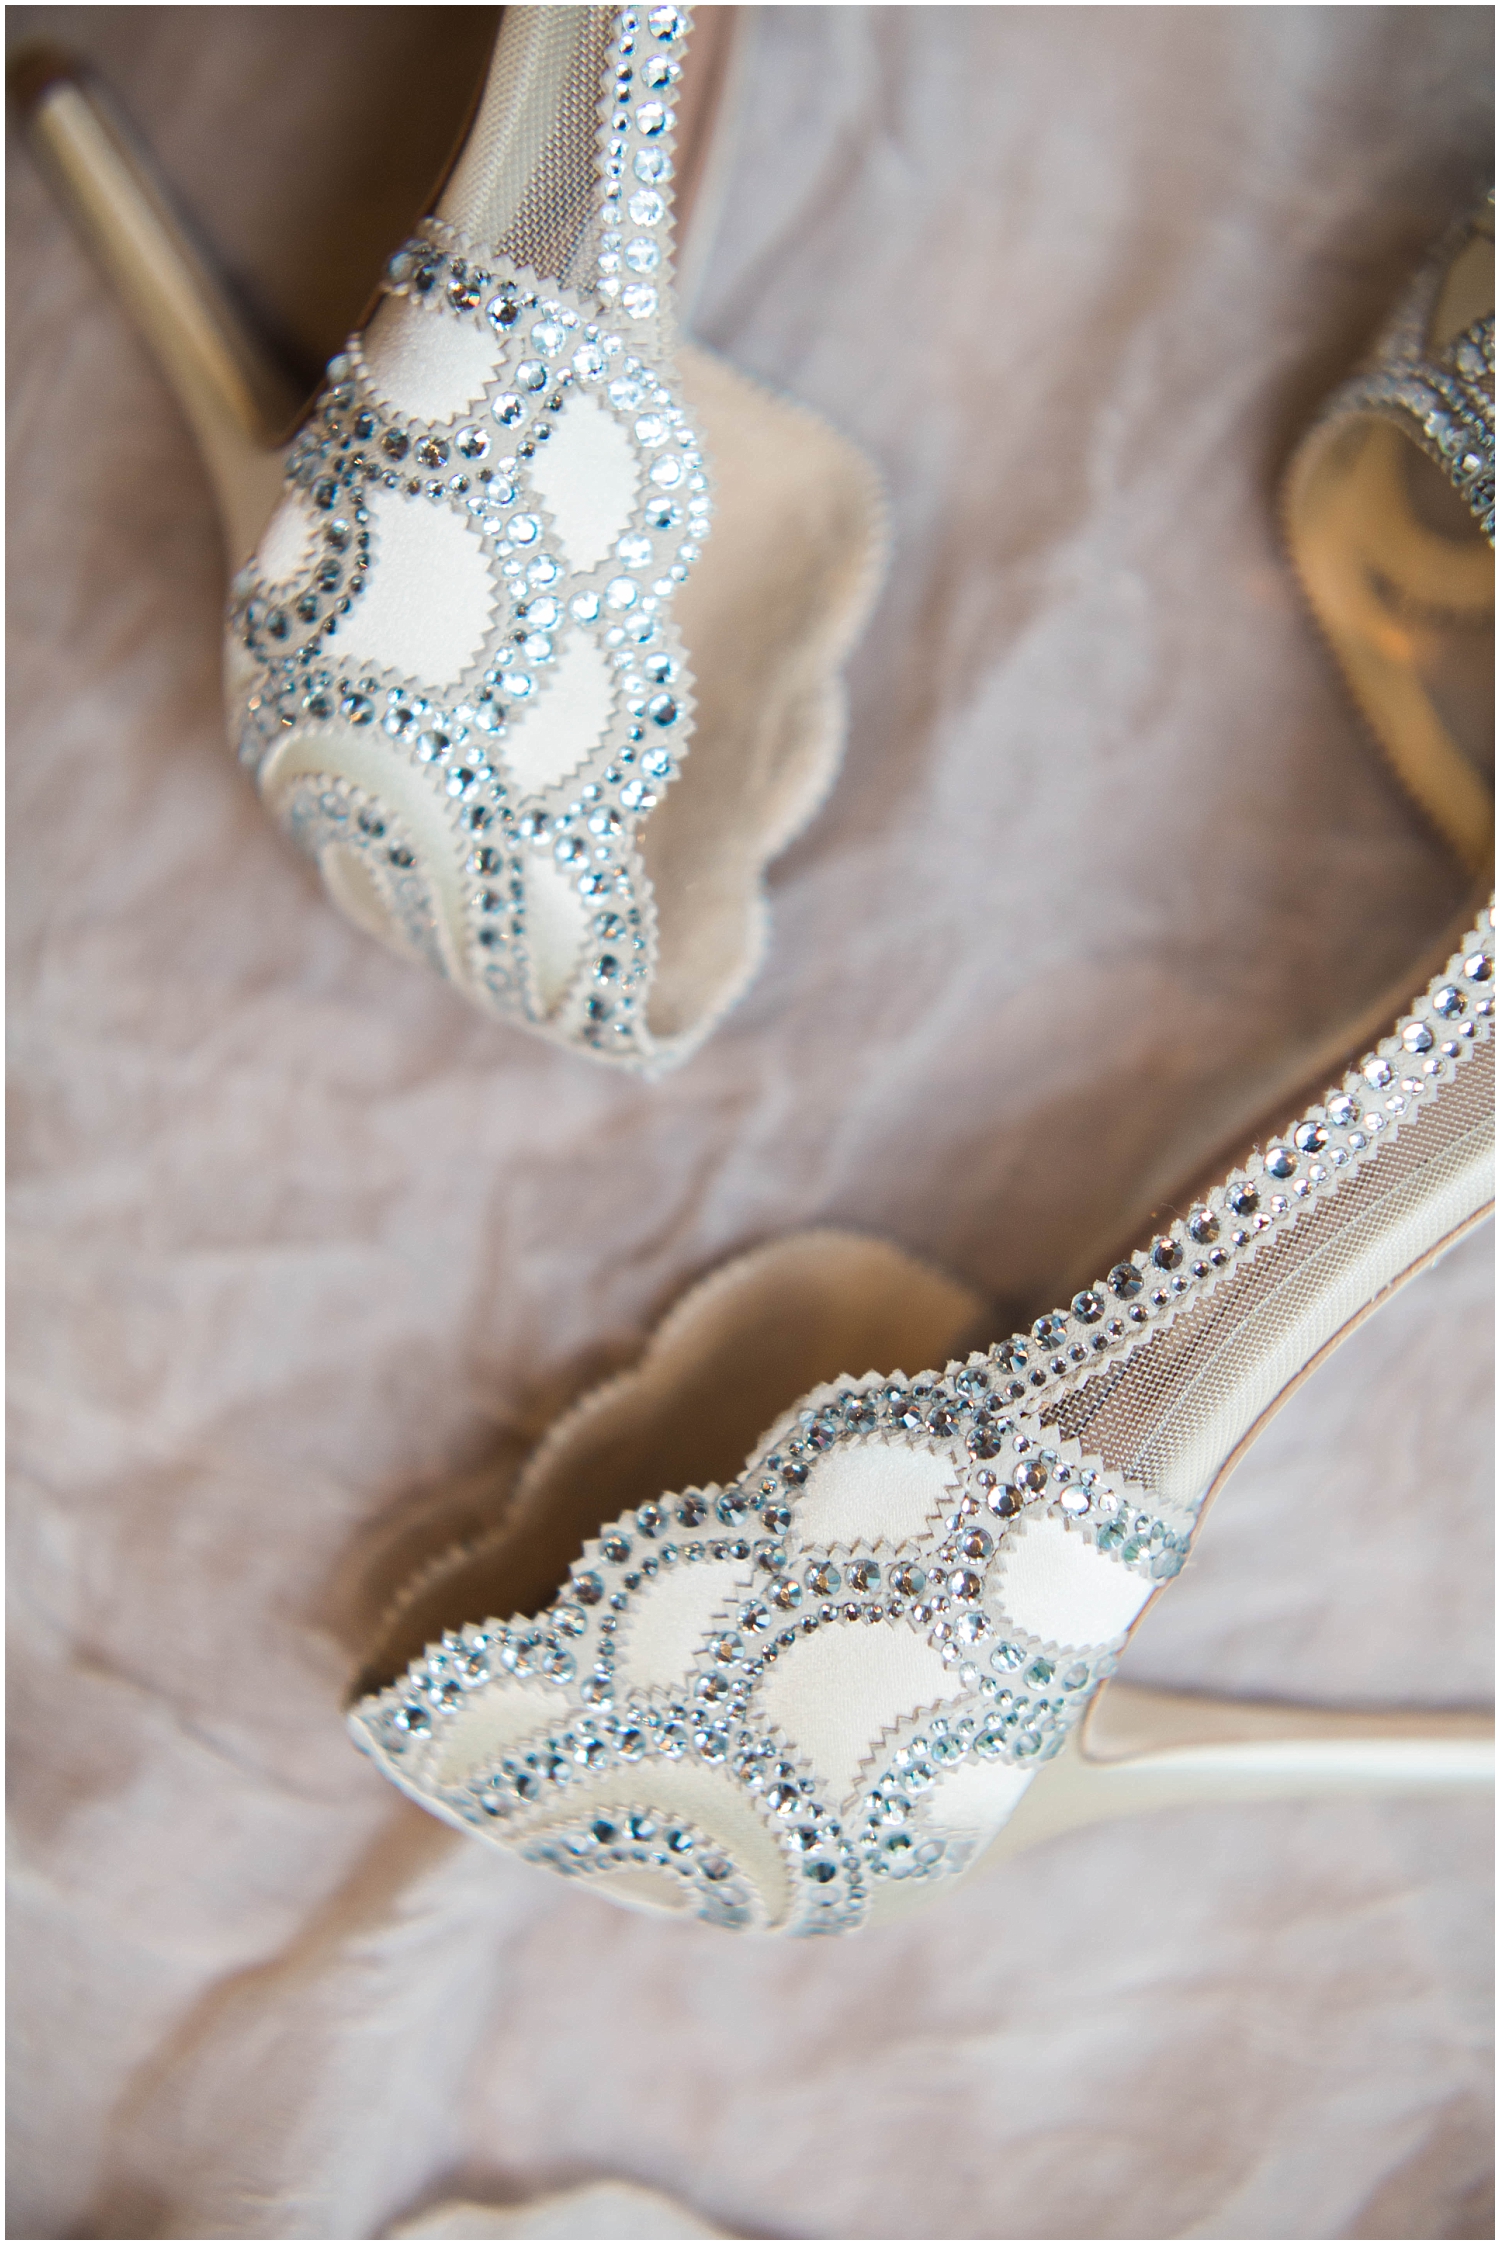  the bride’s wedding shoes 